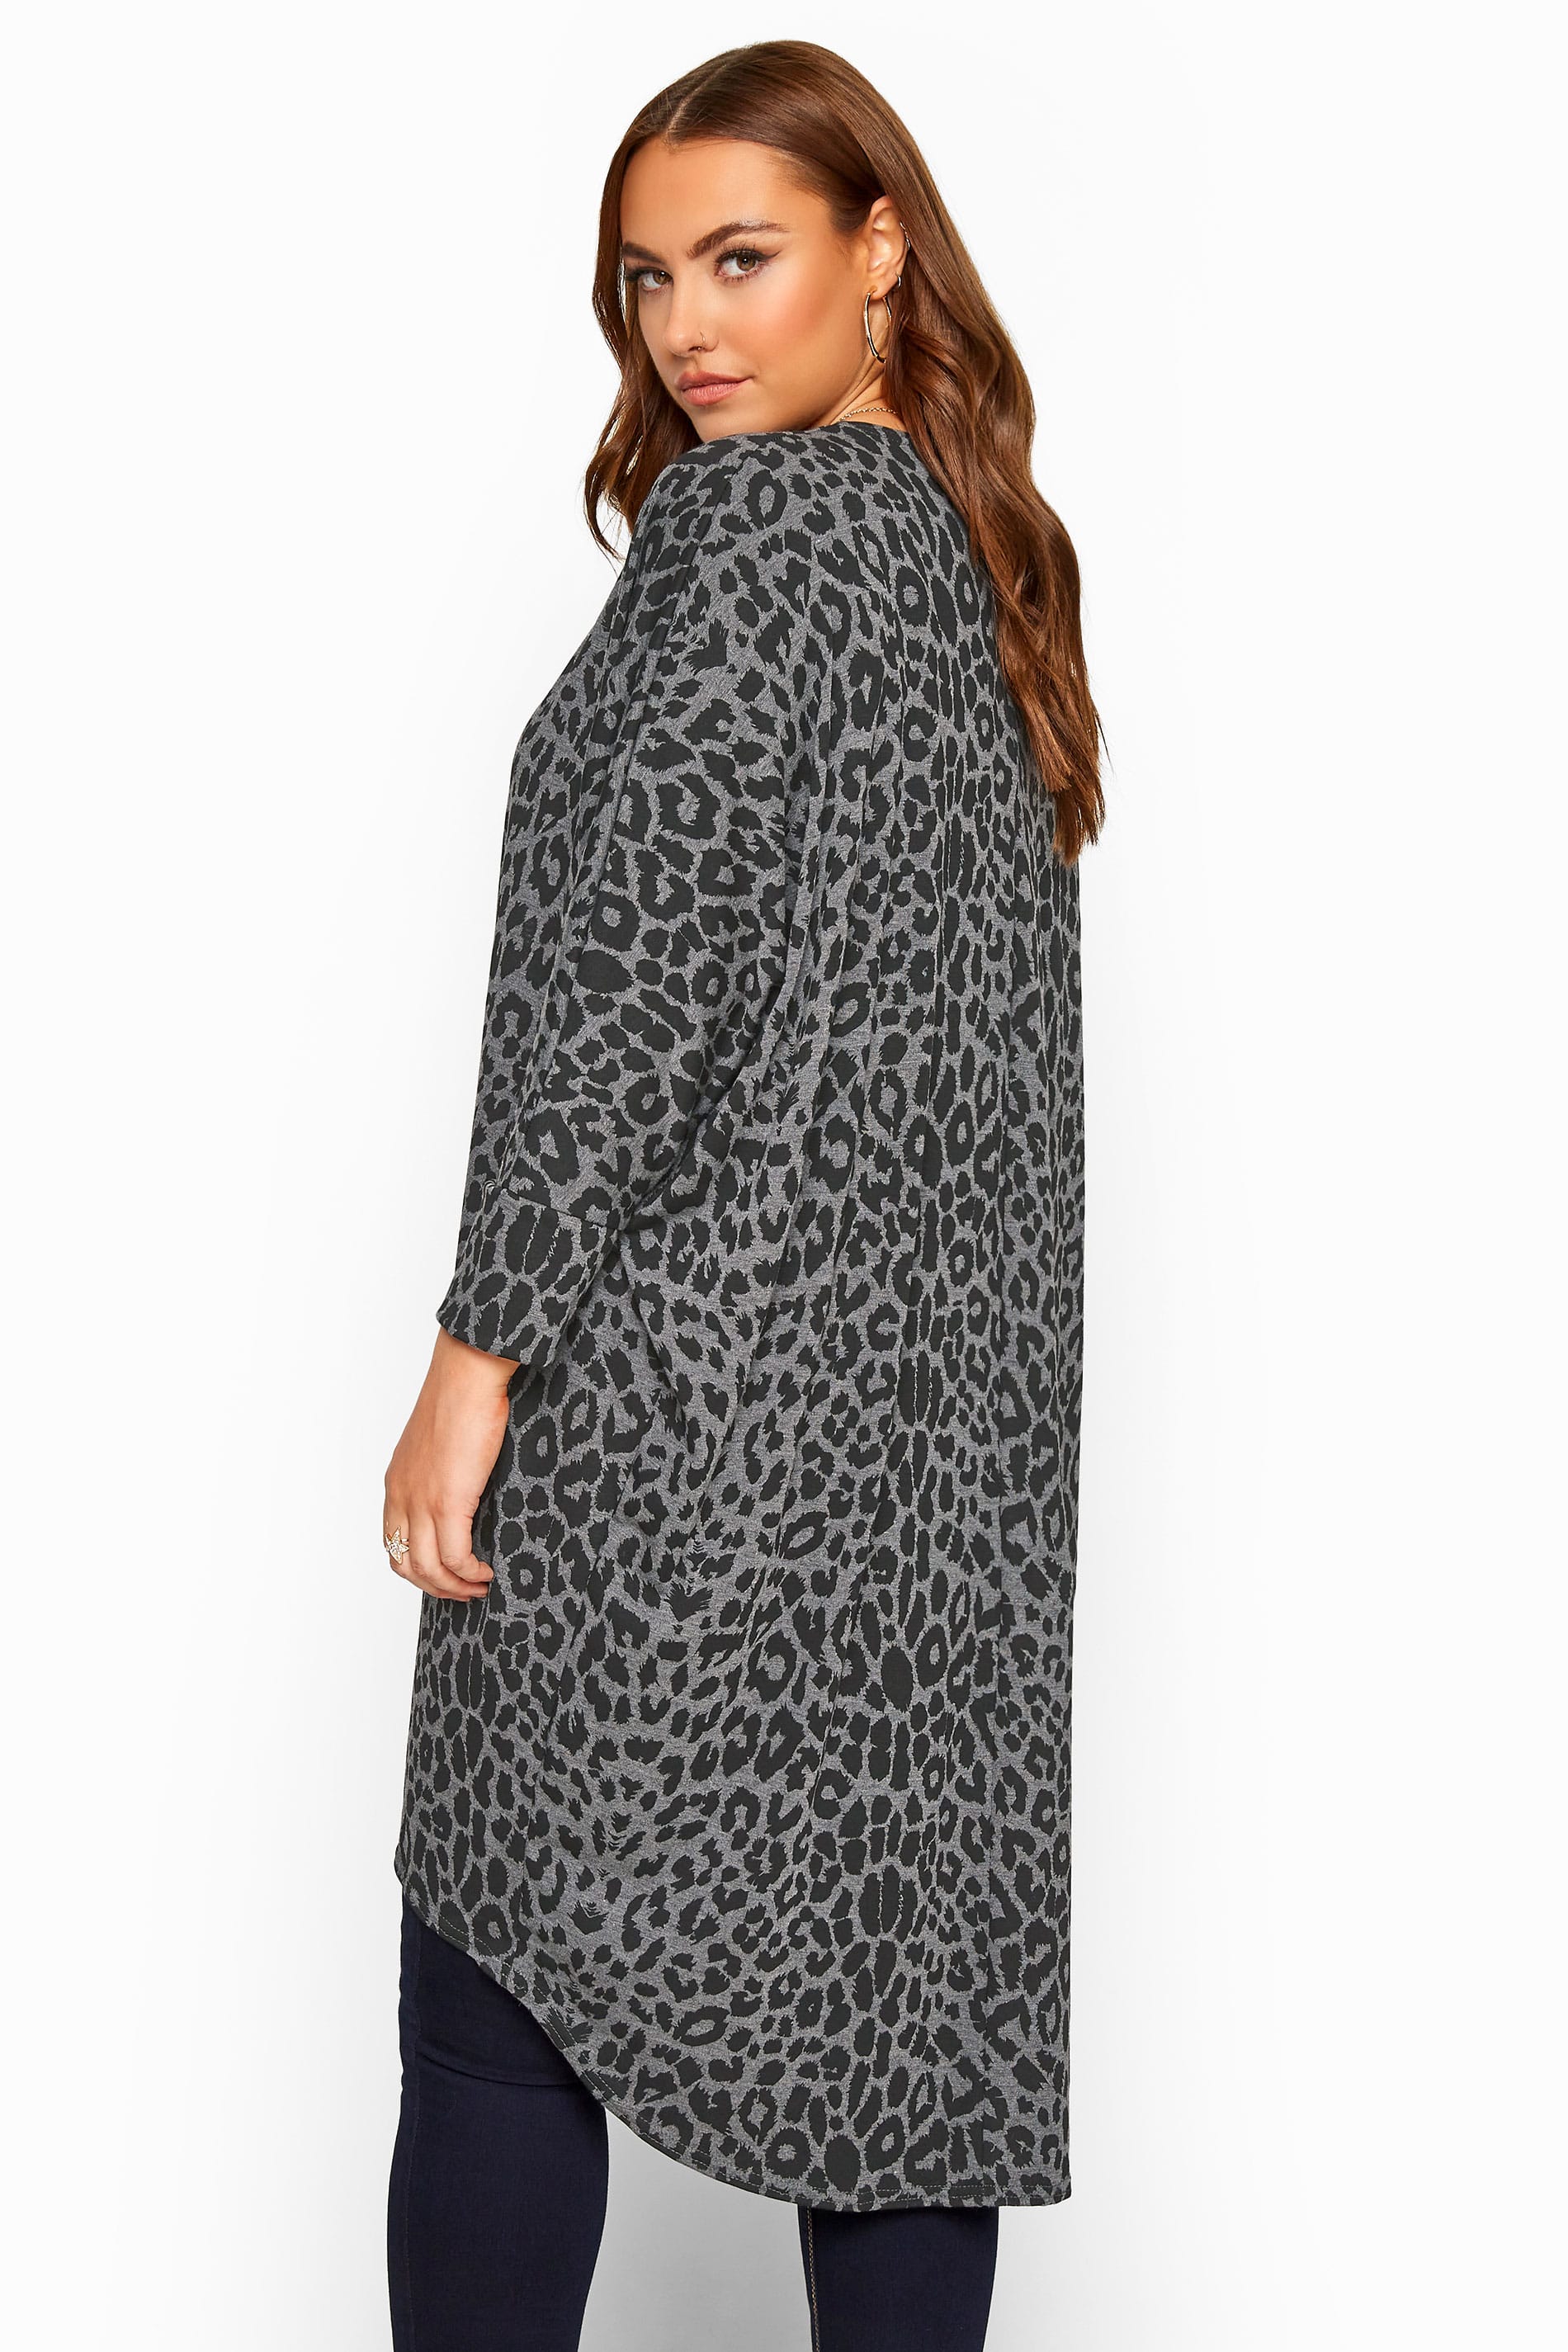 Grey Leopard Print Cocoon Cardigan | Yours Clothing